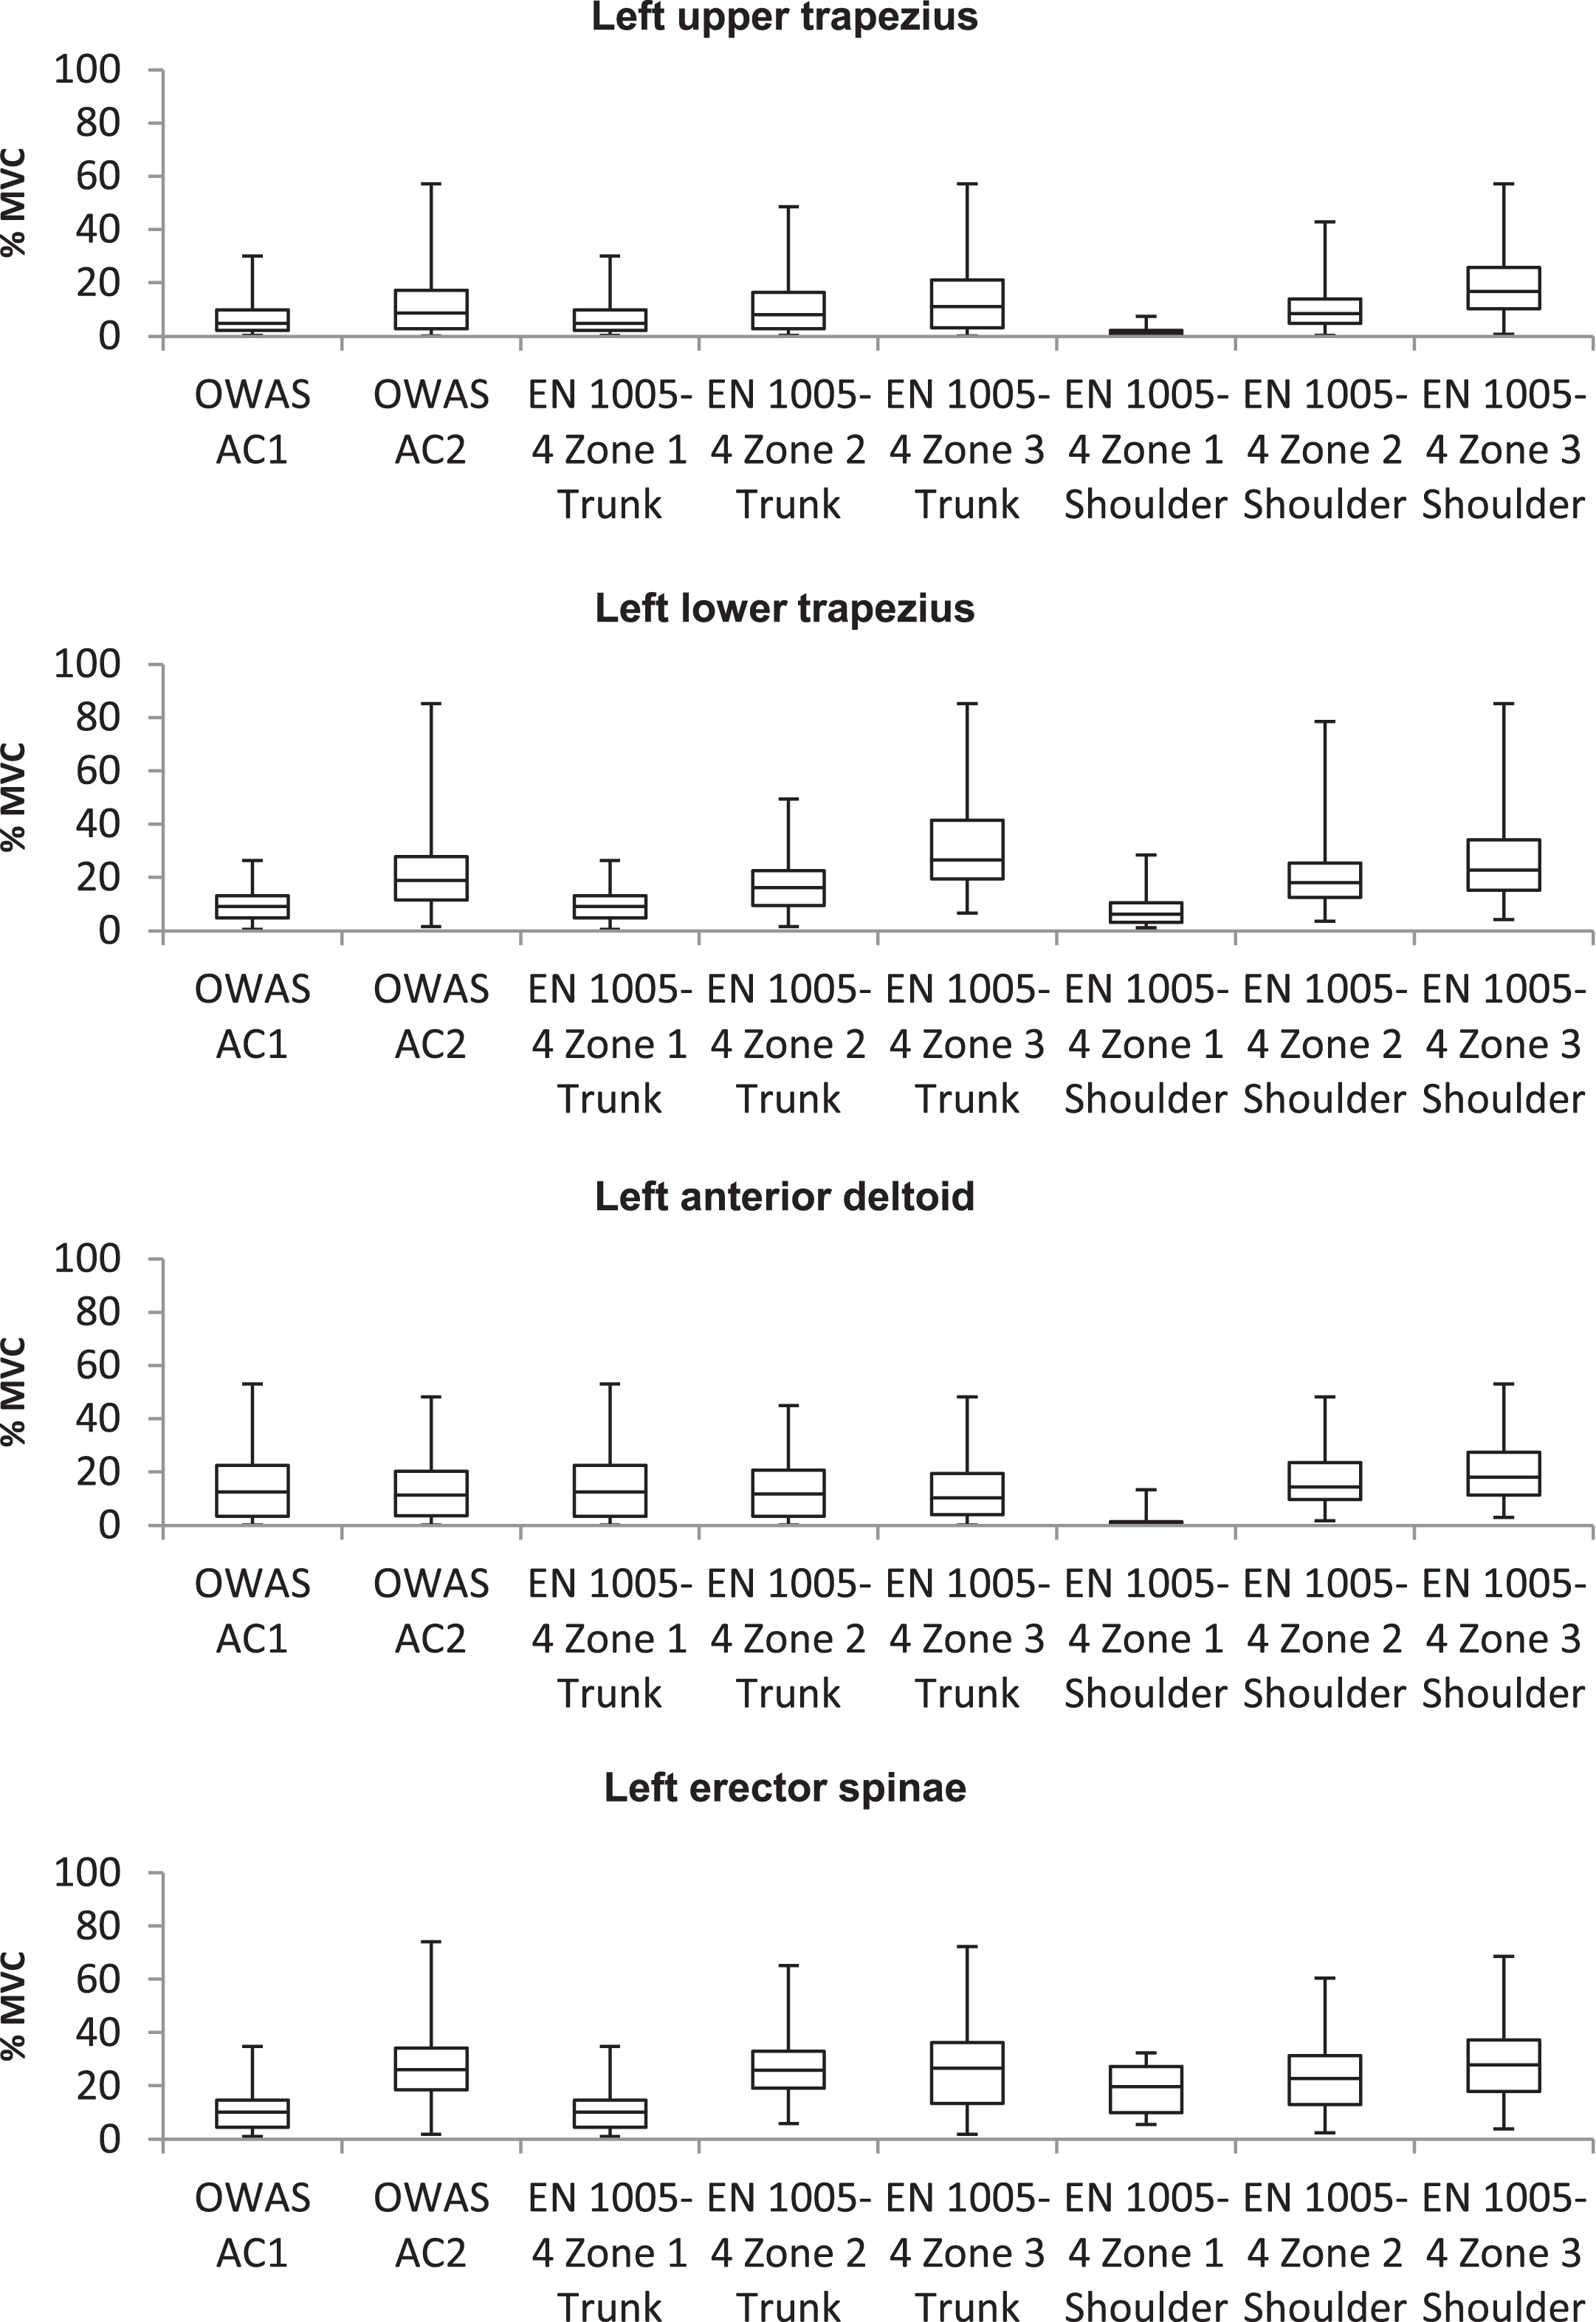 Relationship of left body side muscle activity and assessment results of OWAS and EN 1005-4.